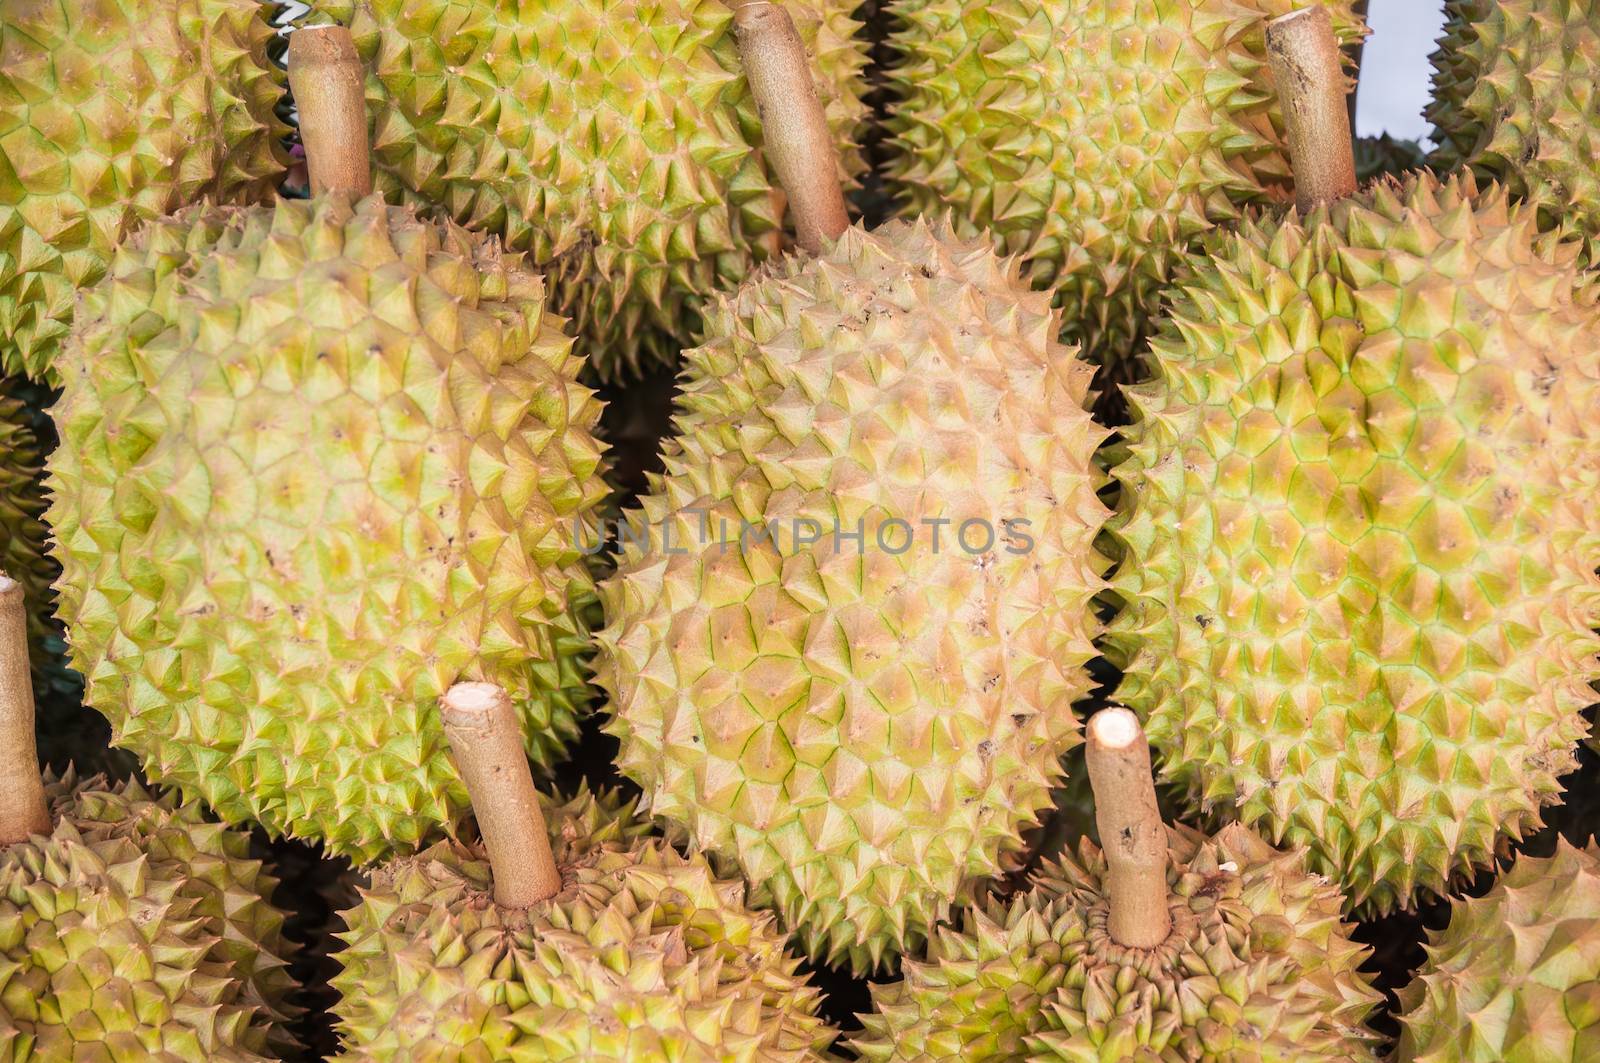 Durian, king of fruit, famous fruit in Thailand,Durain delicious